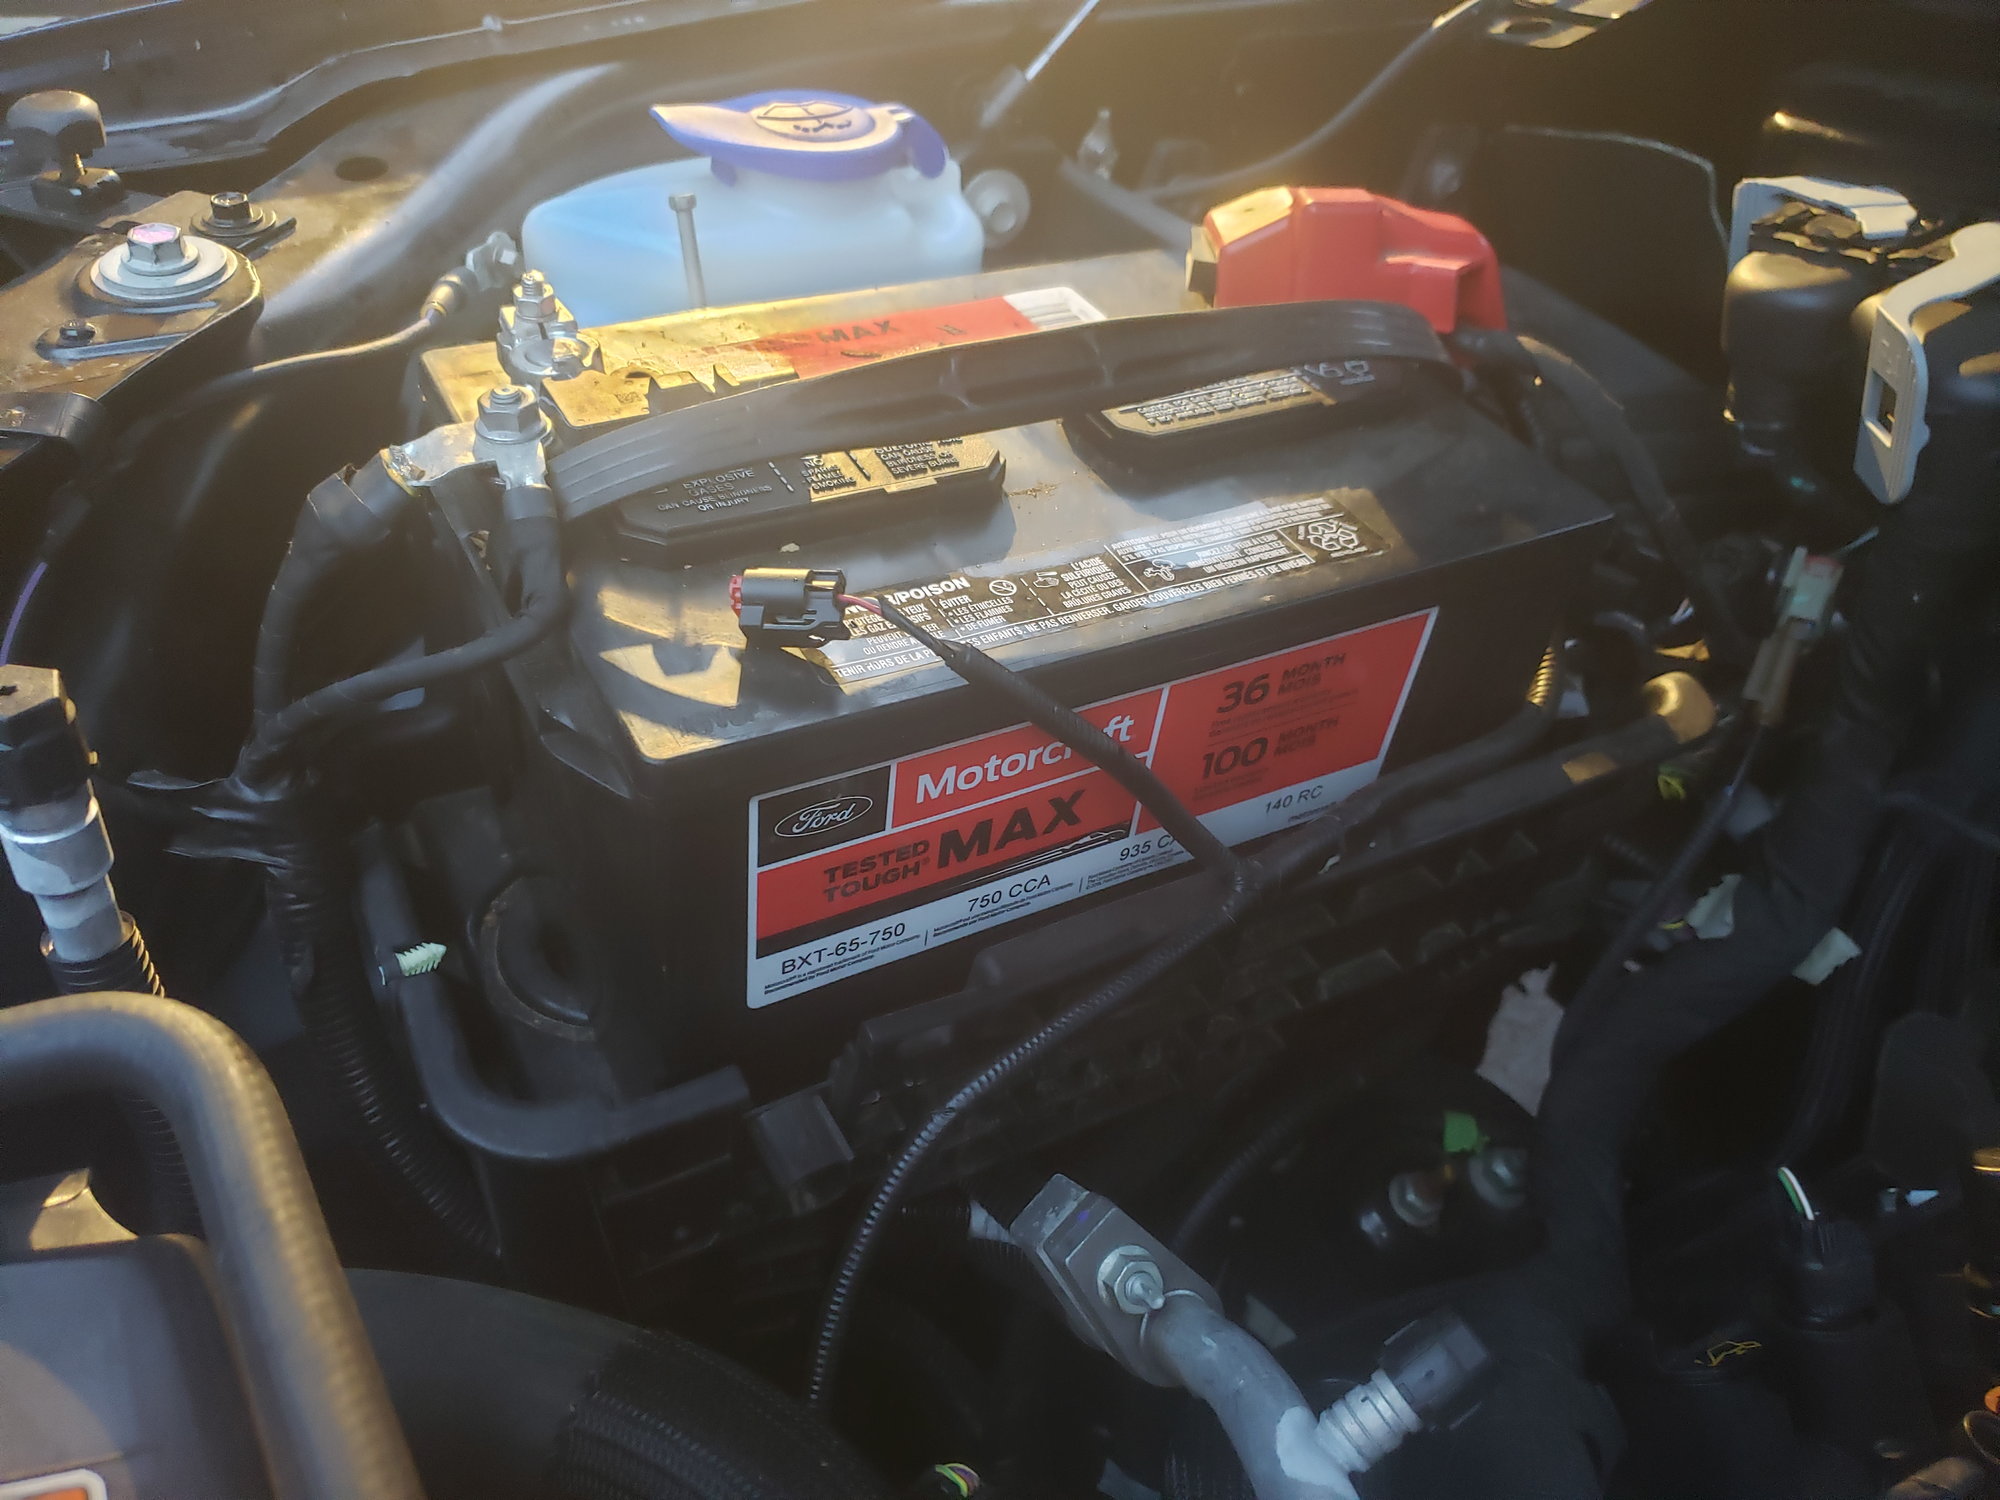 Battery issue in new truck - Ford F150 Forum - Community of Ford Truck Fans 2015 Ford F150 Trailer Battery Not Charging Message